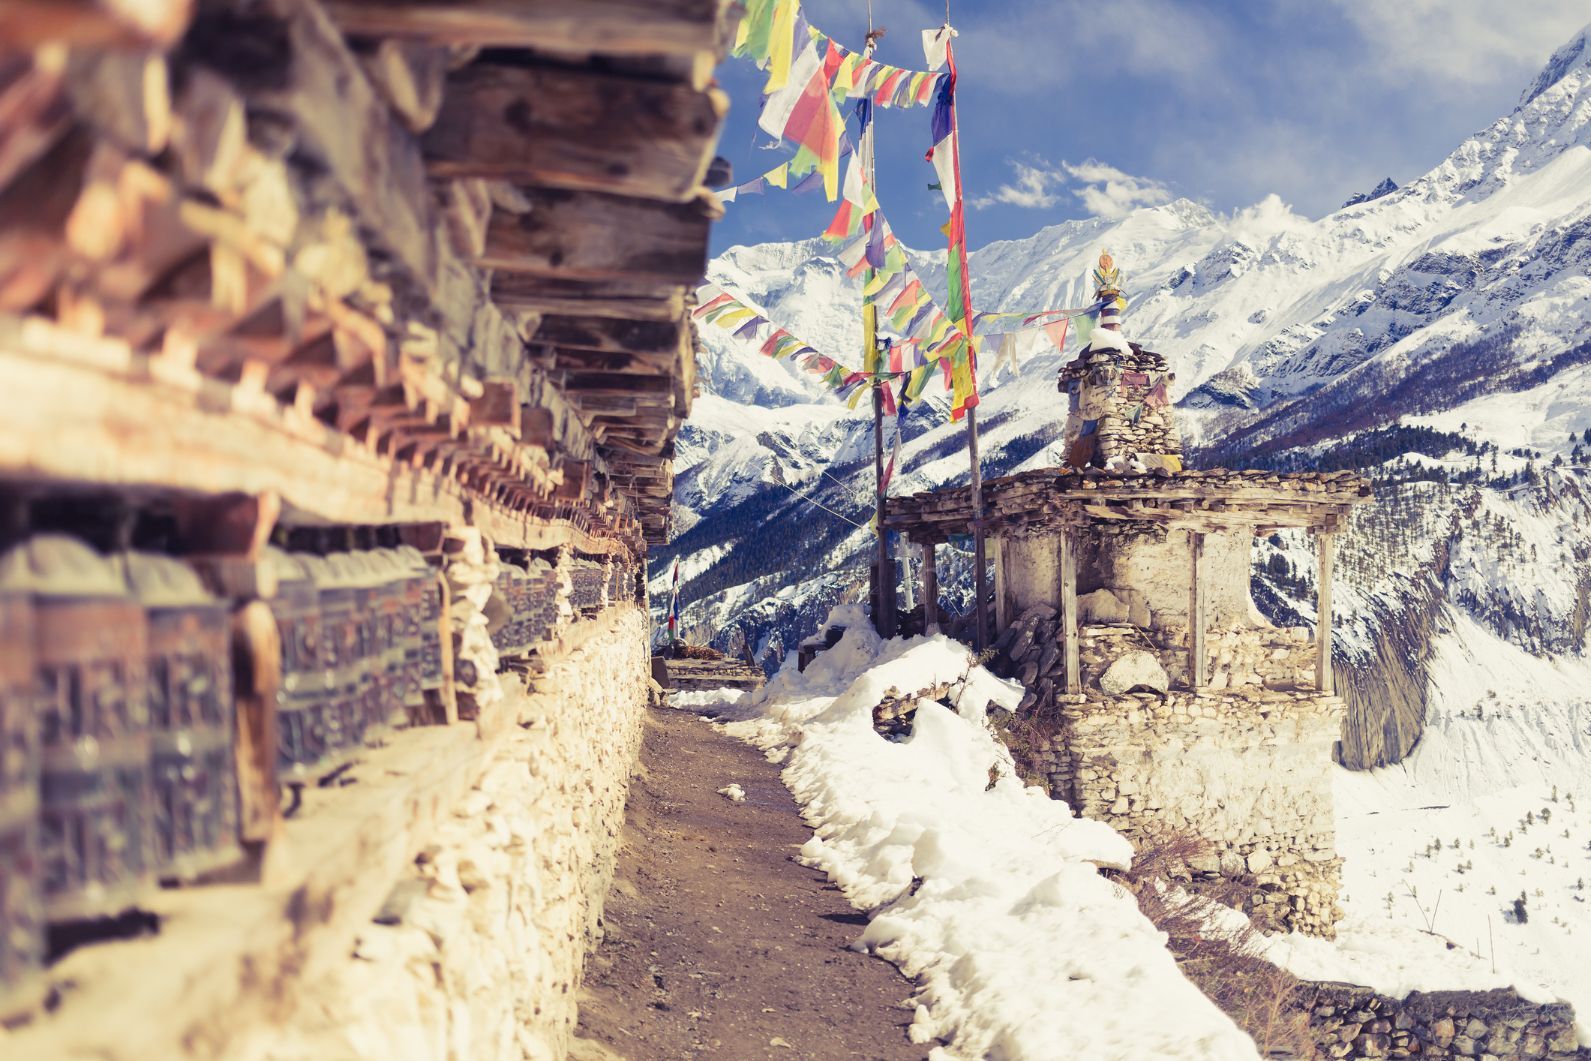 Prayer flags and high mountain ranges; no rare sight on a tour of the Annapurna Circuit. Photo: Getty